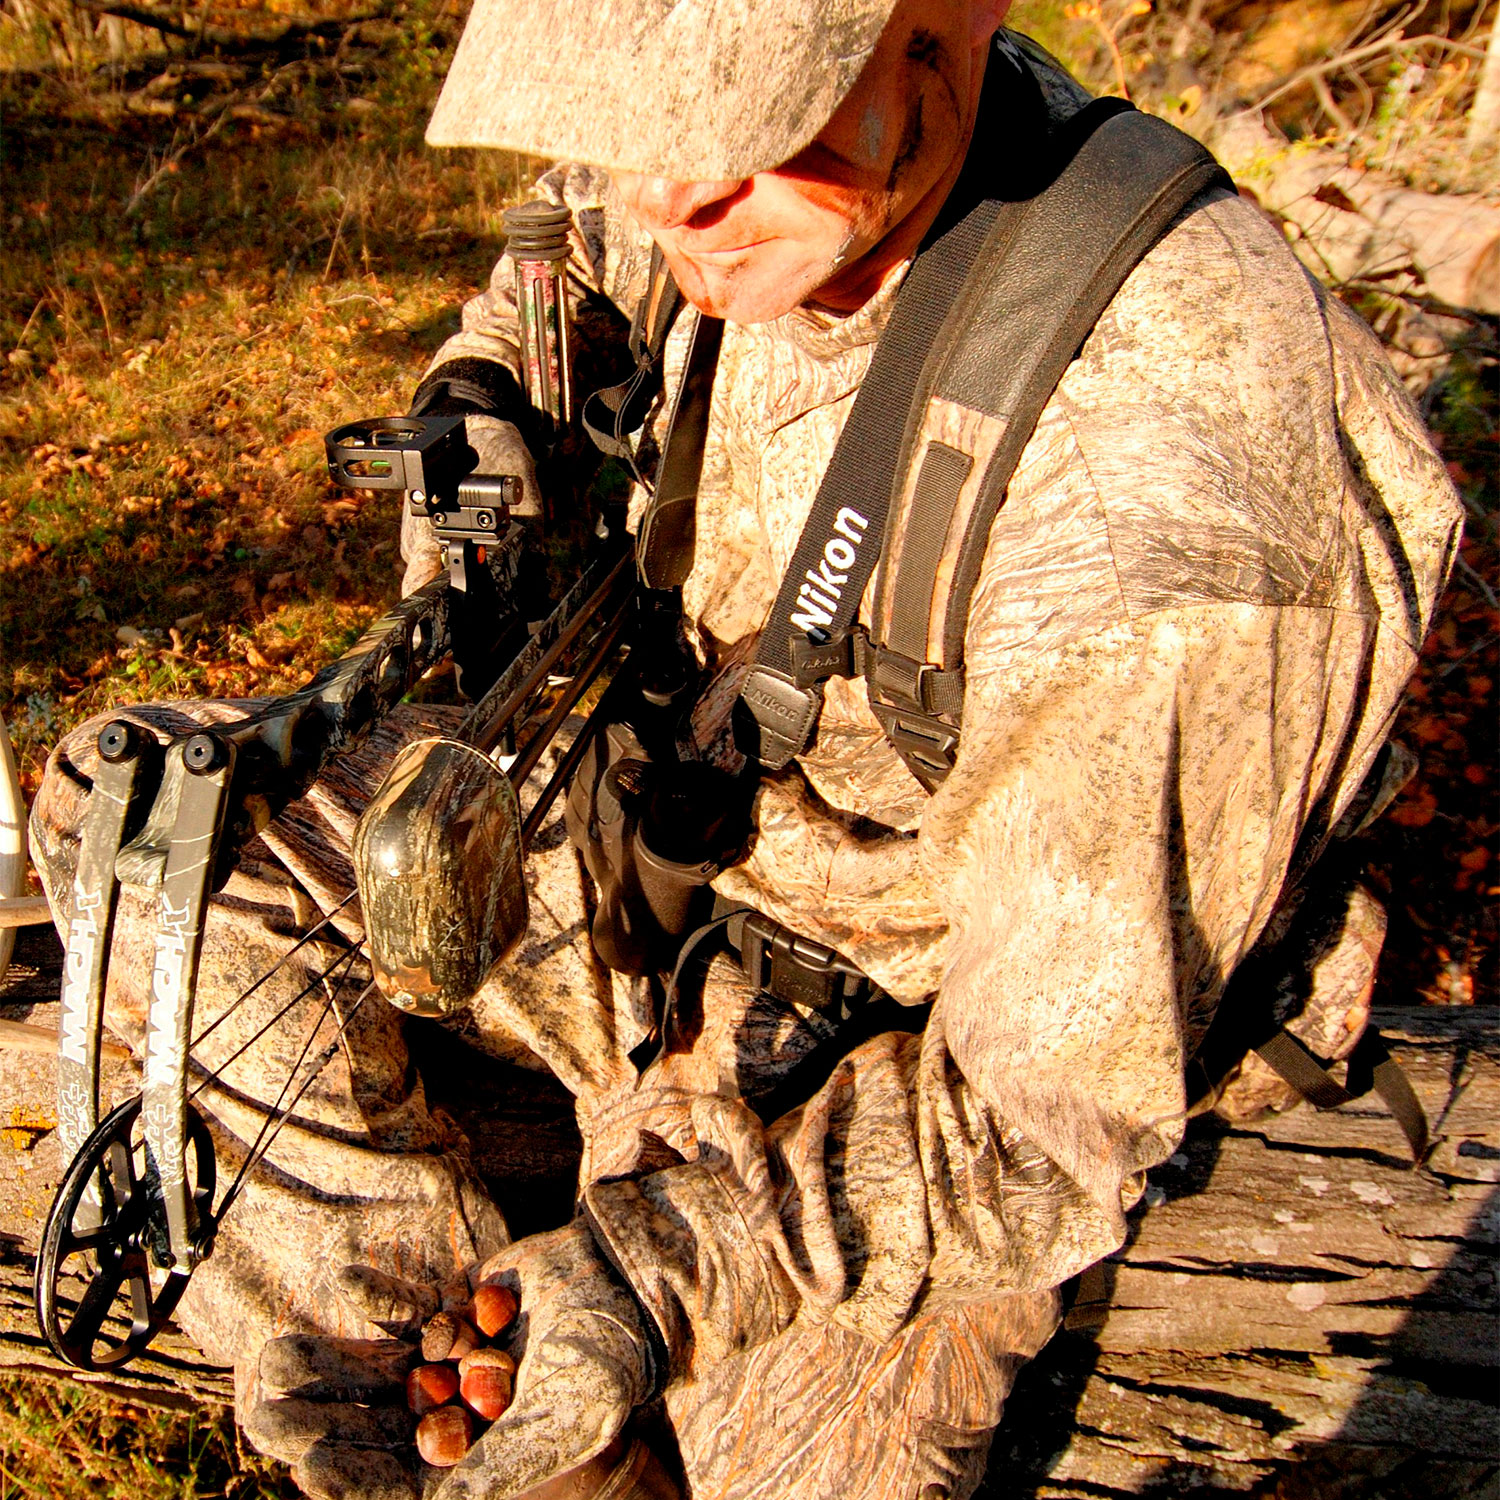 A hunter holding a compound bow examies a handful of acorns.